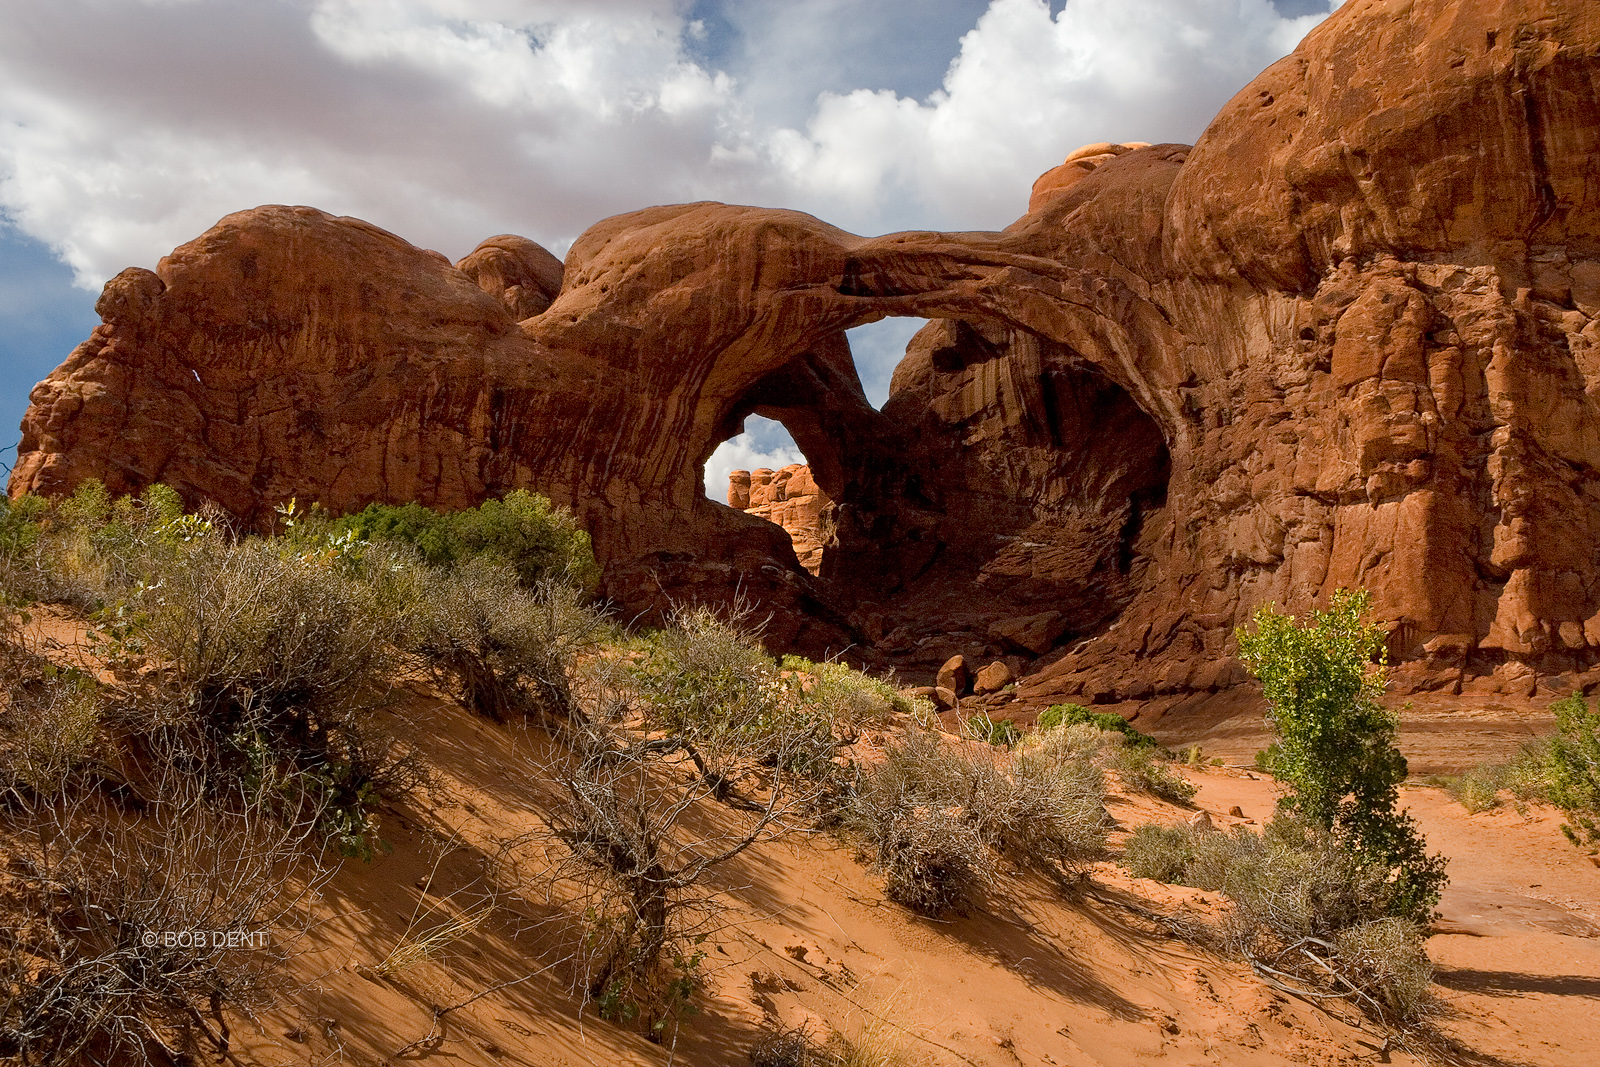 Afternoon clouds gather above Double Arch, Arches National Park, Utah.